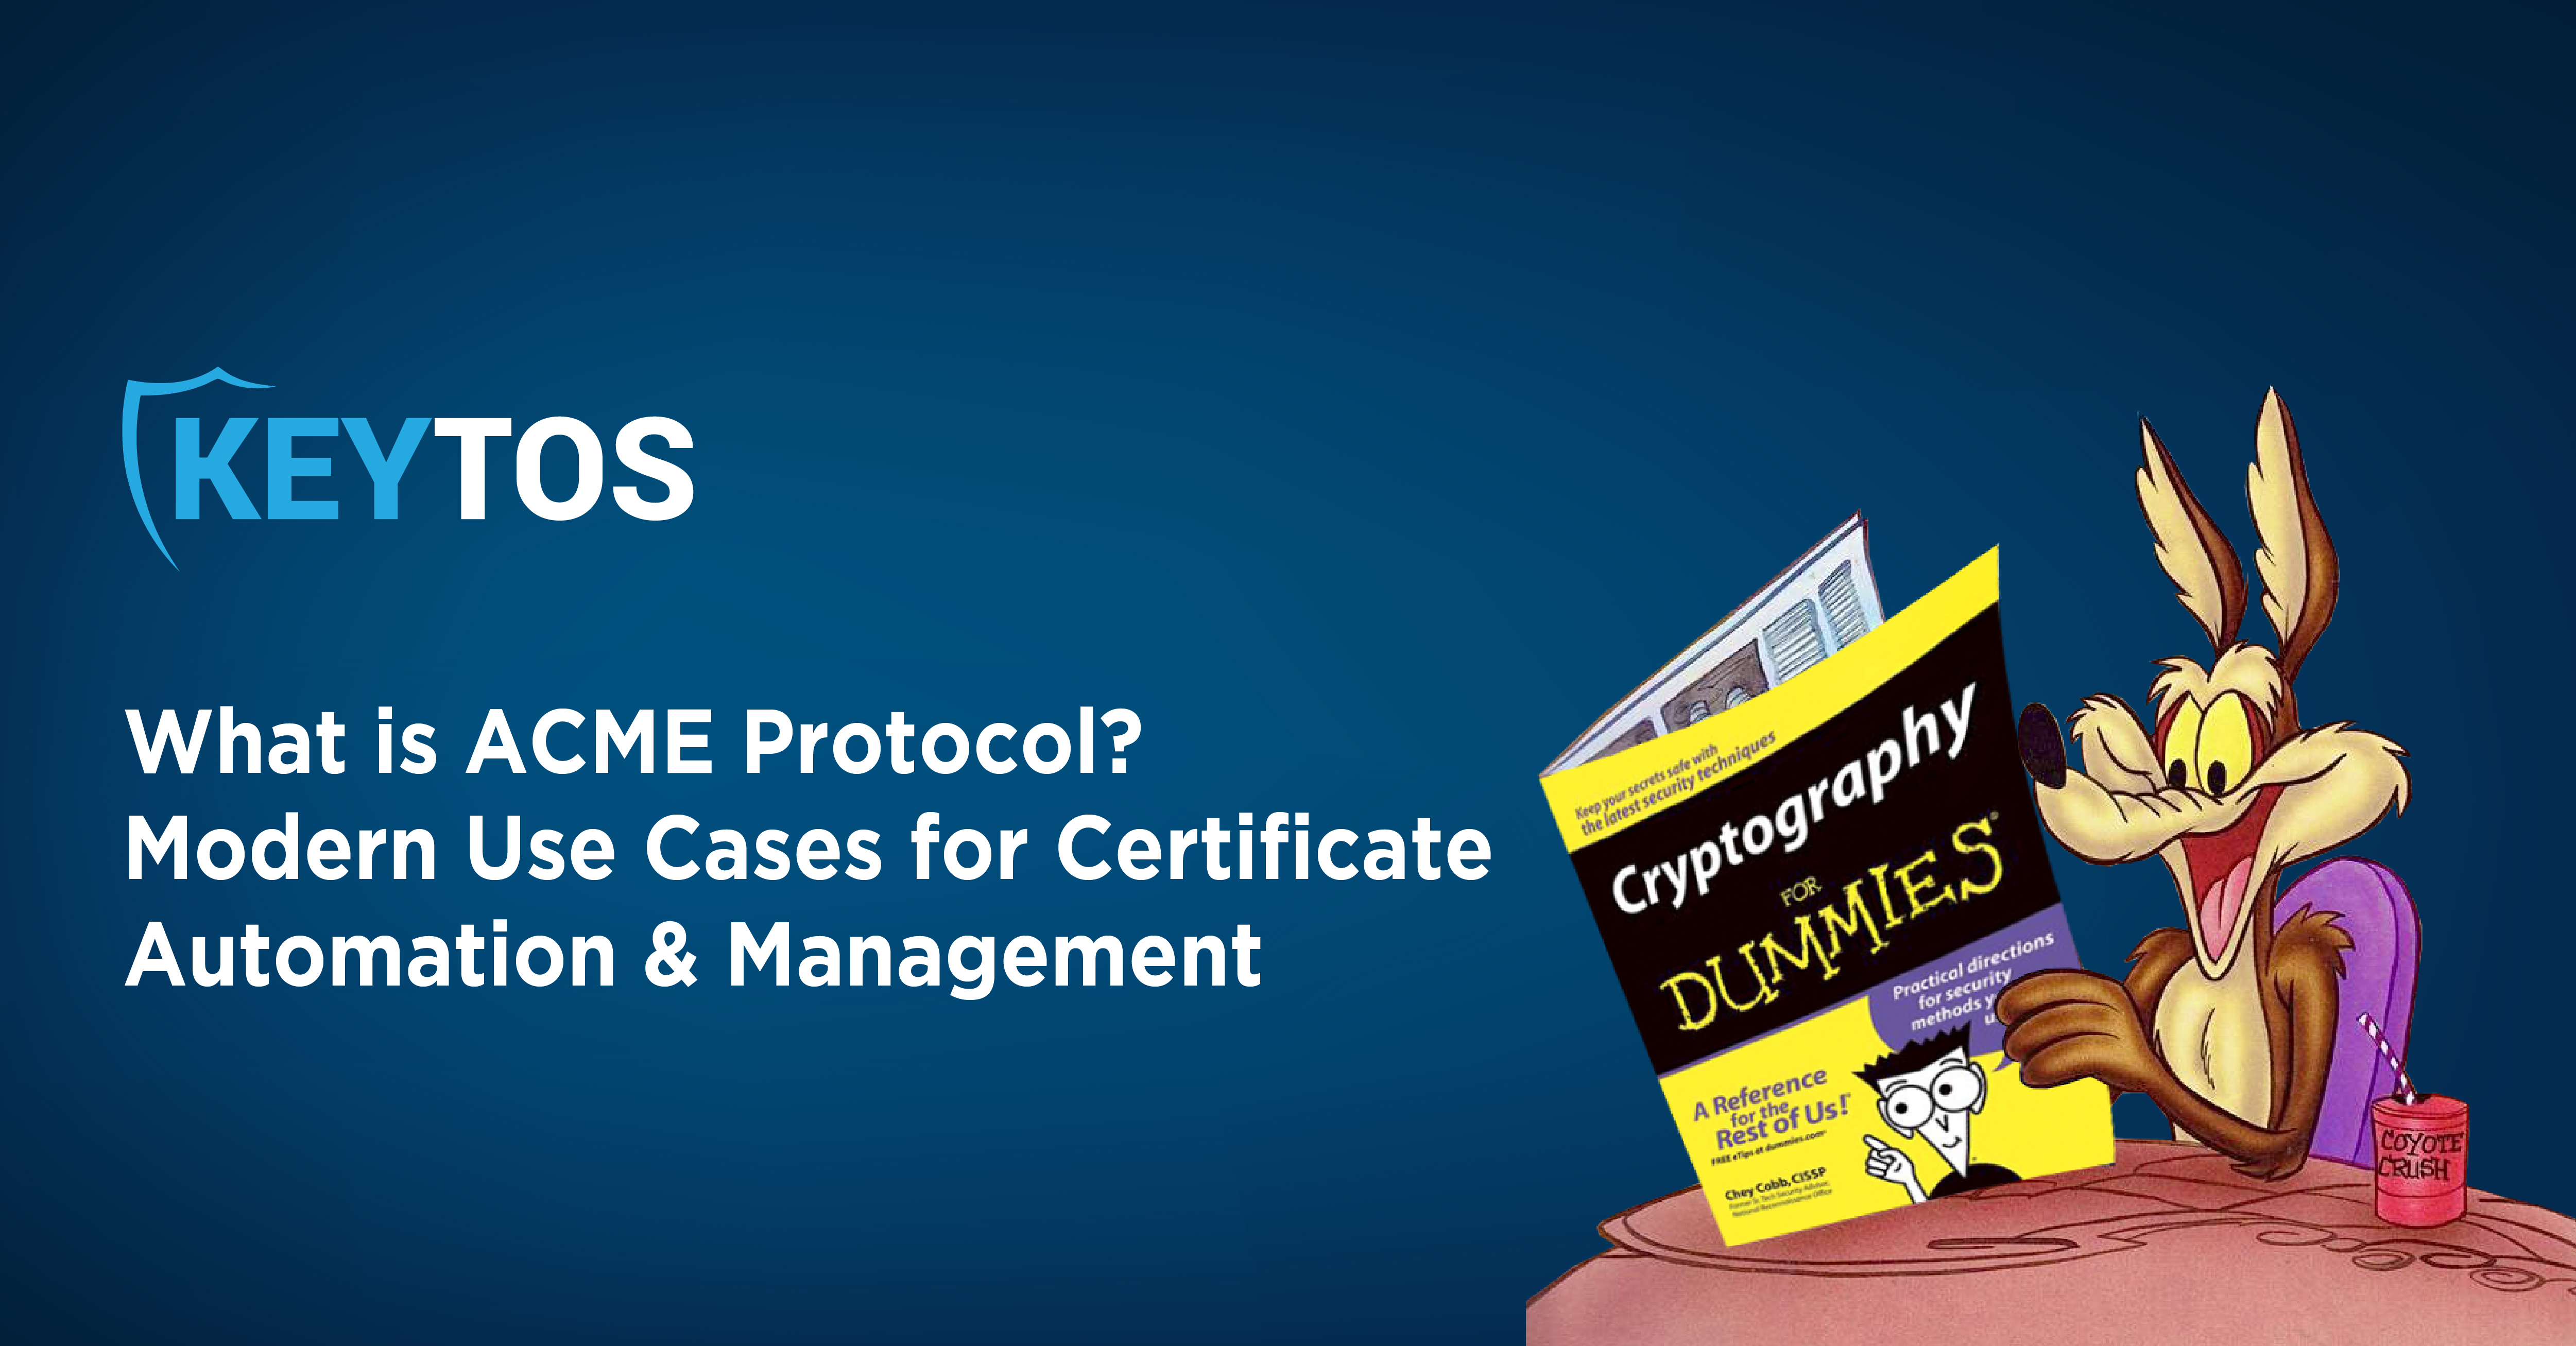 What is ACME Protocol? Modern Use Cases for Certificate Automation & Management